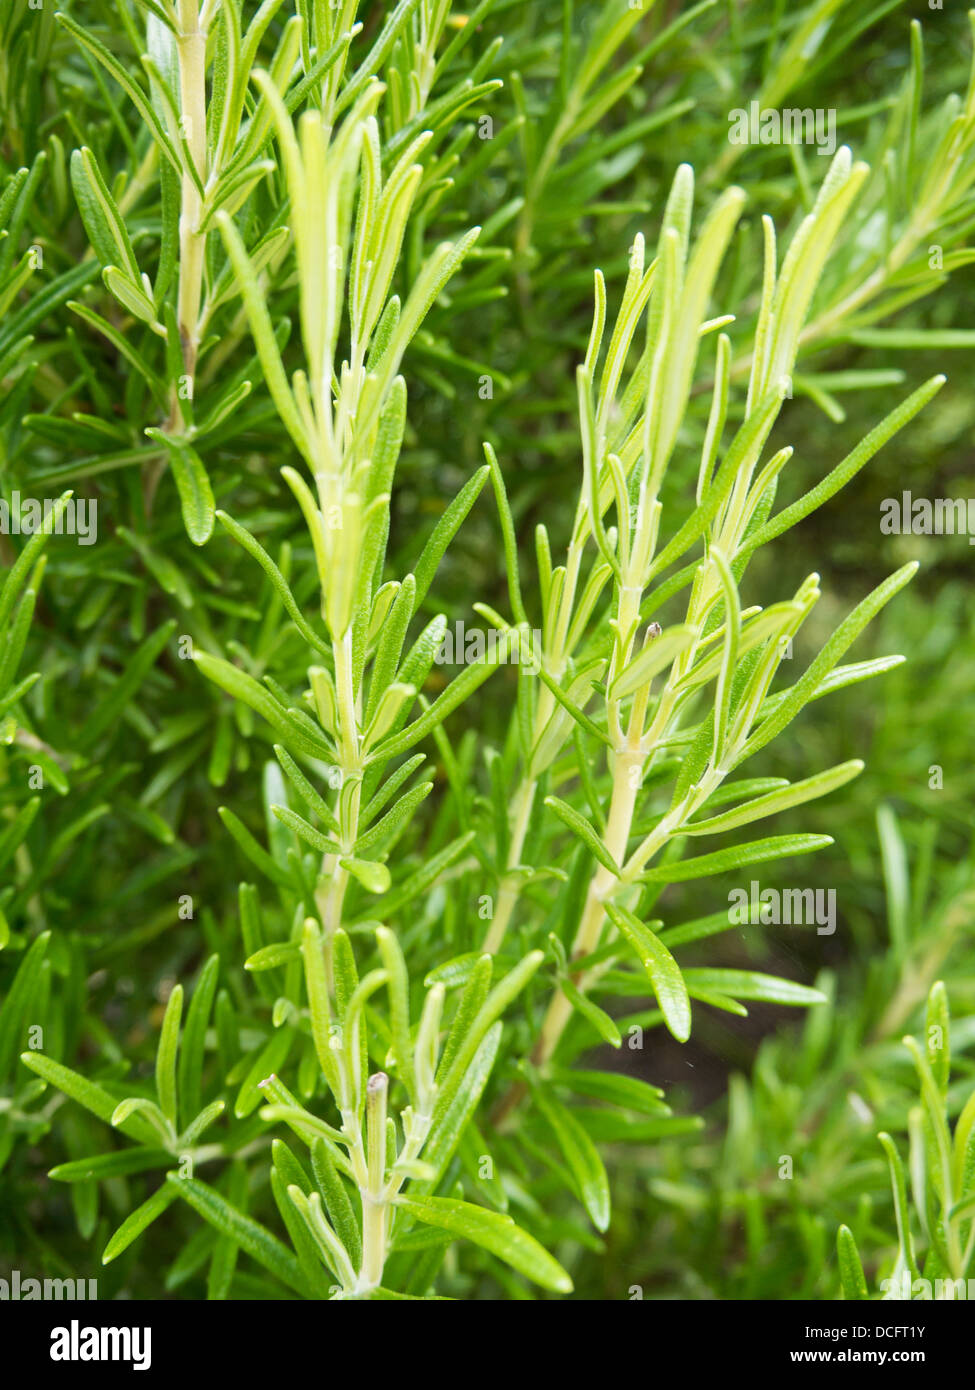 Rosemary growing in a garden. Rosemary is a herb that can be used for cooking. Stock Photo